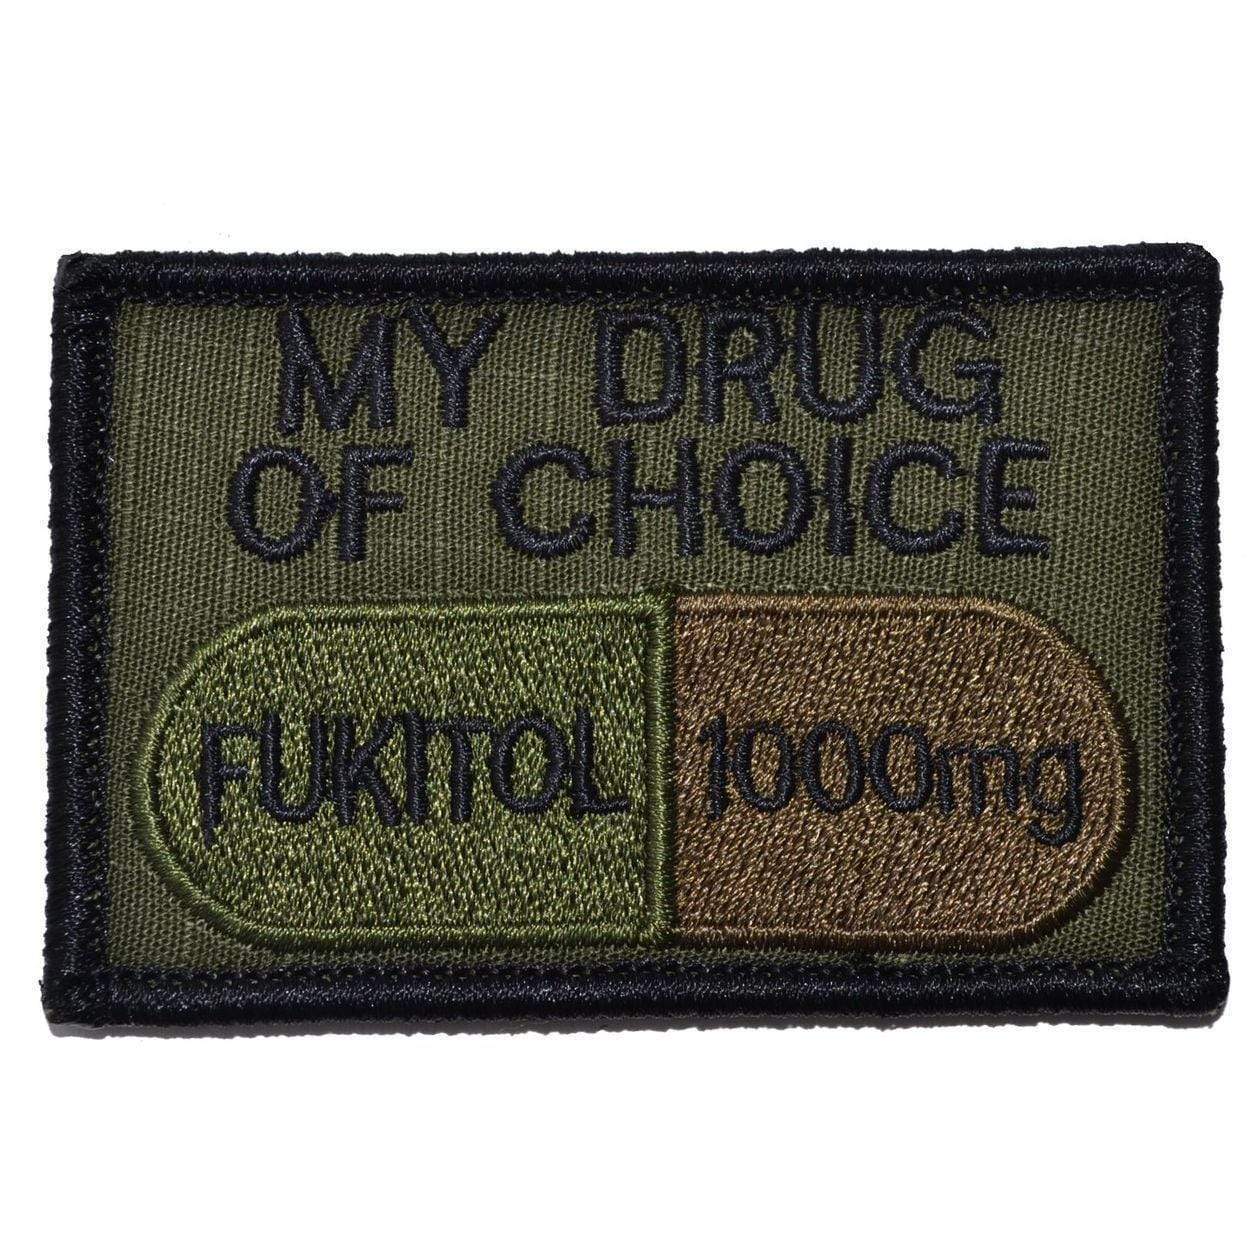 Tactical Gear Junkie Patches Olive Drab Fukitol, My Drug of Choice - 2x3 Patch